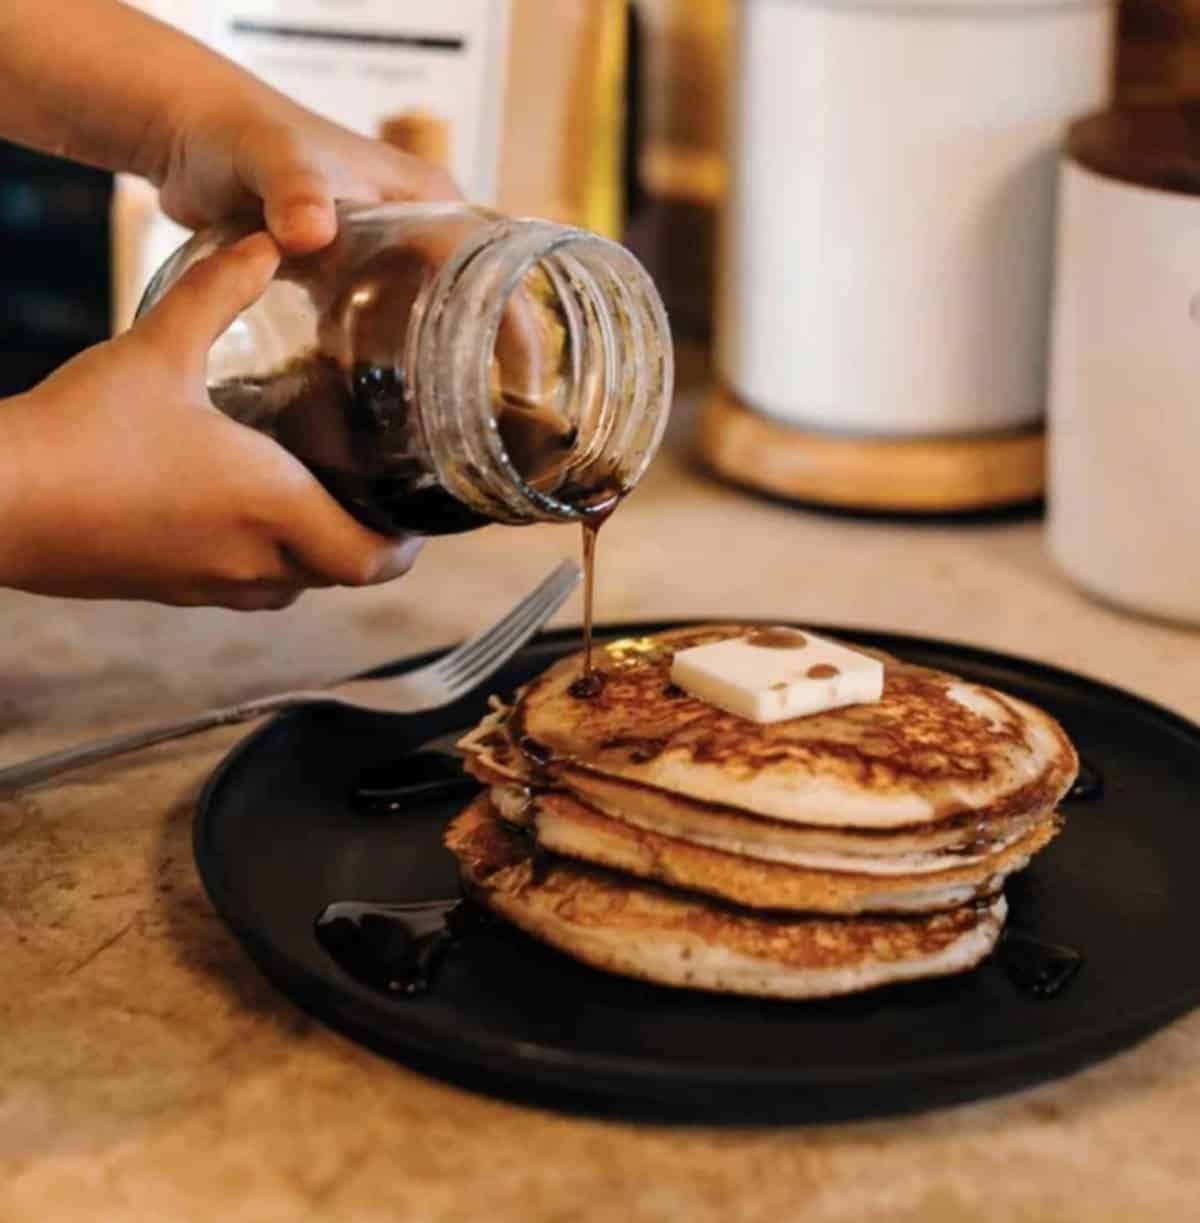 Hands holding a jar of syrup and pouring it over a stack of vegan pancakes on a plate.